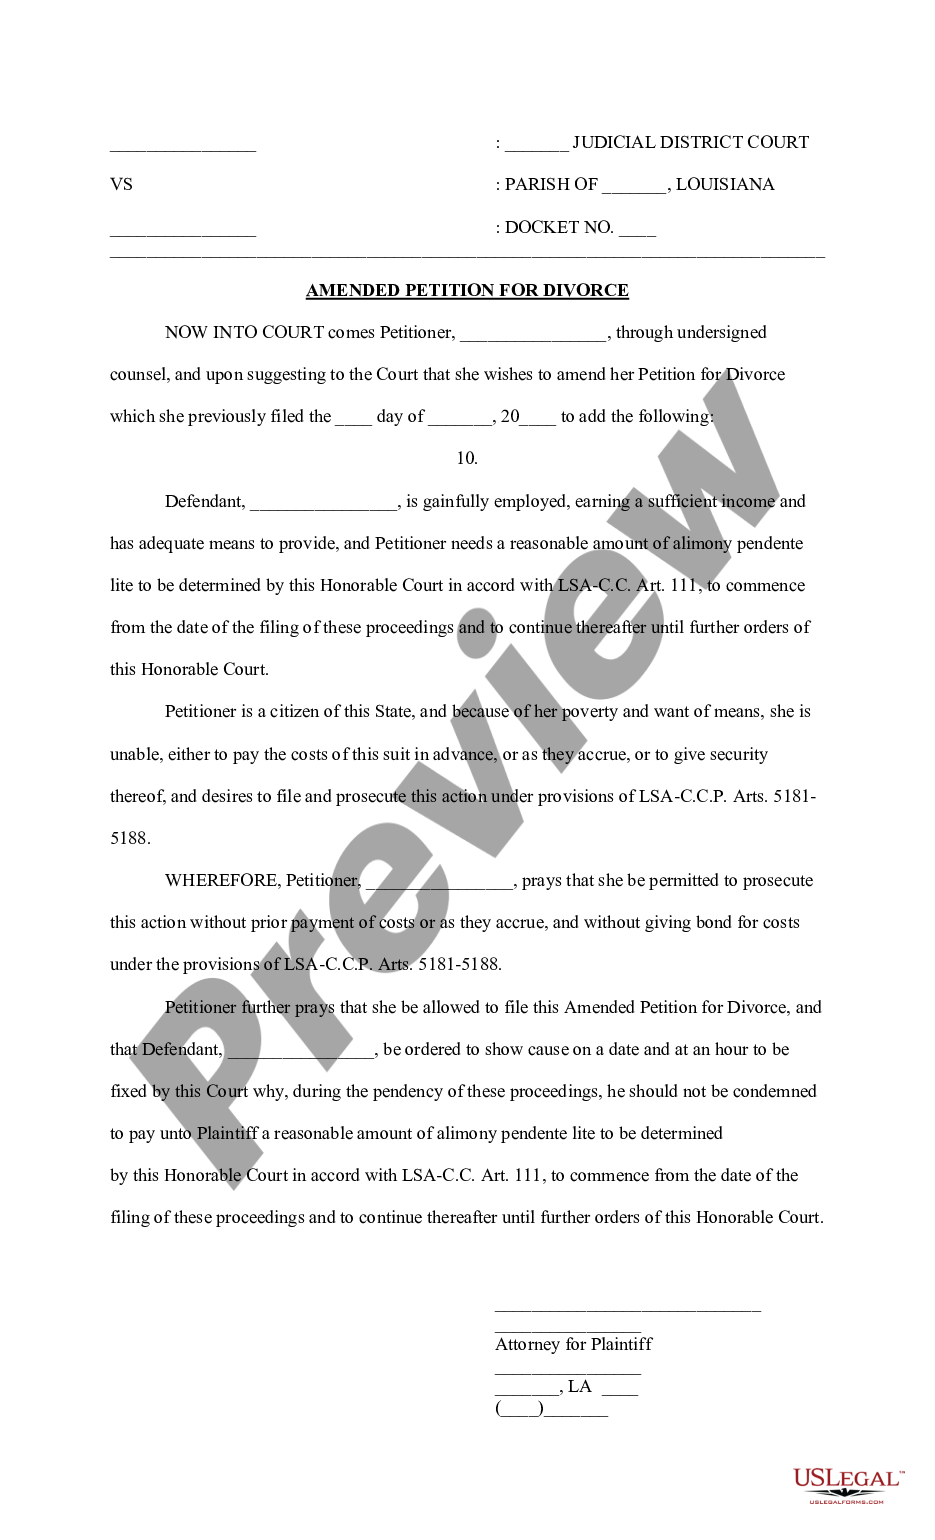 amended-petition-for-divorce-with-minor-child-pdf-us-legal-forms